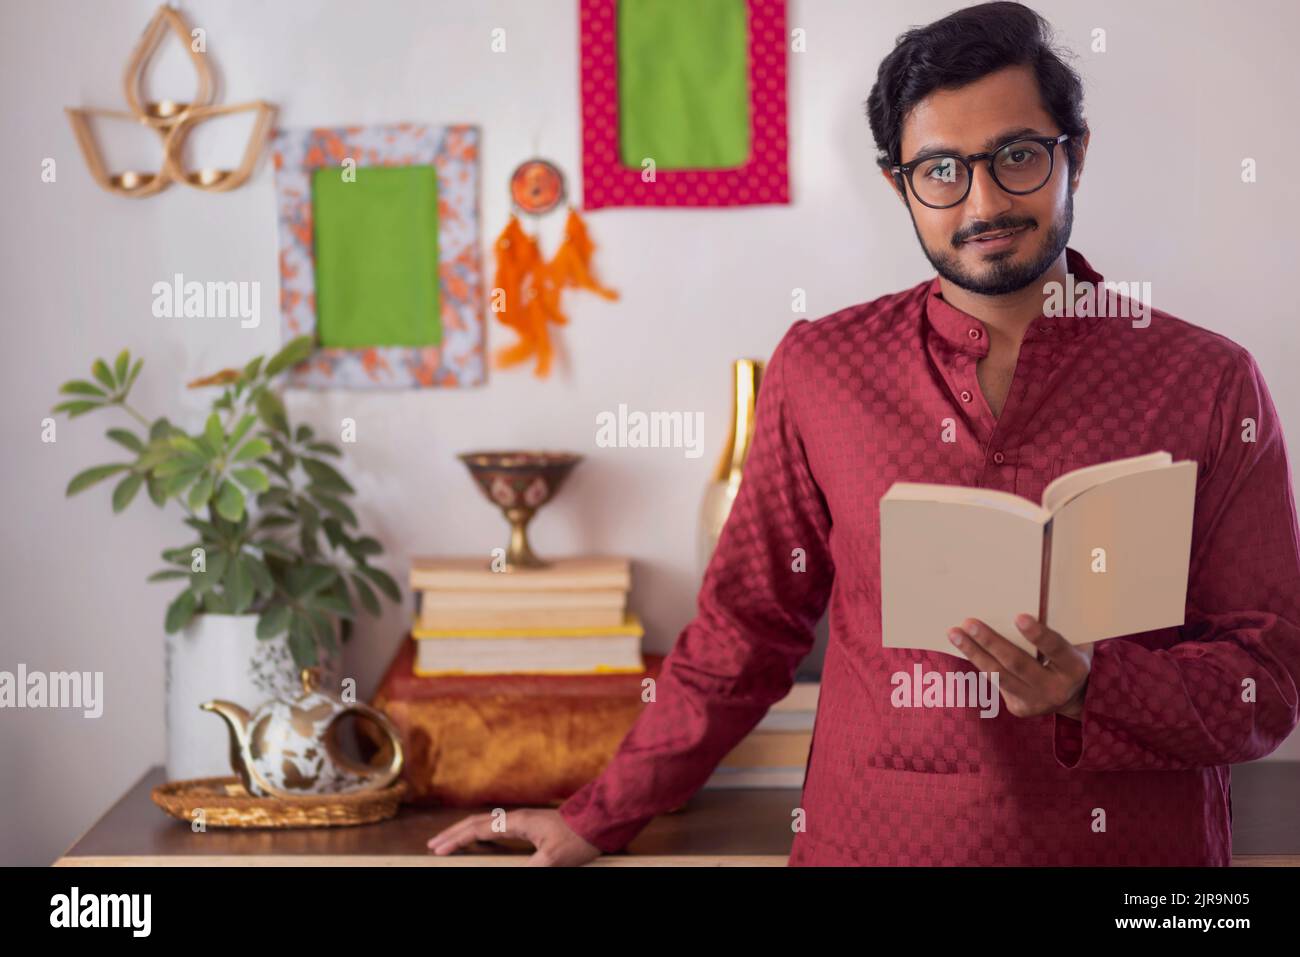 Portrait of a young man reading books in living room Stock Photo